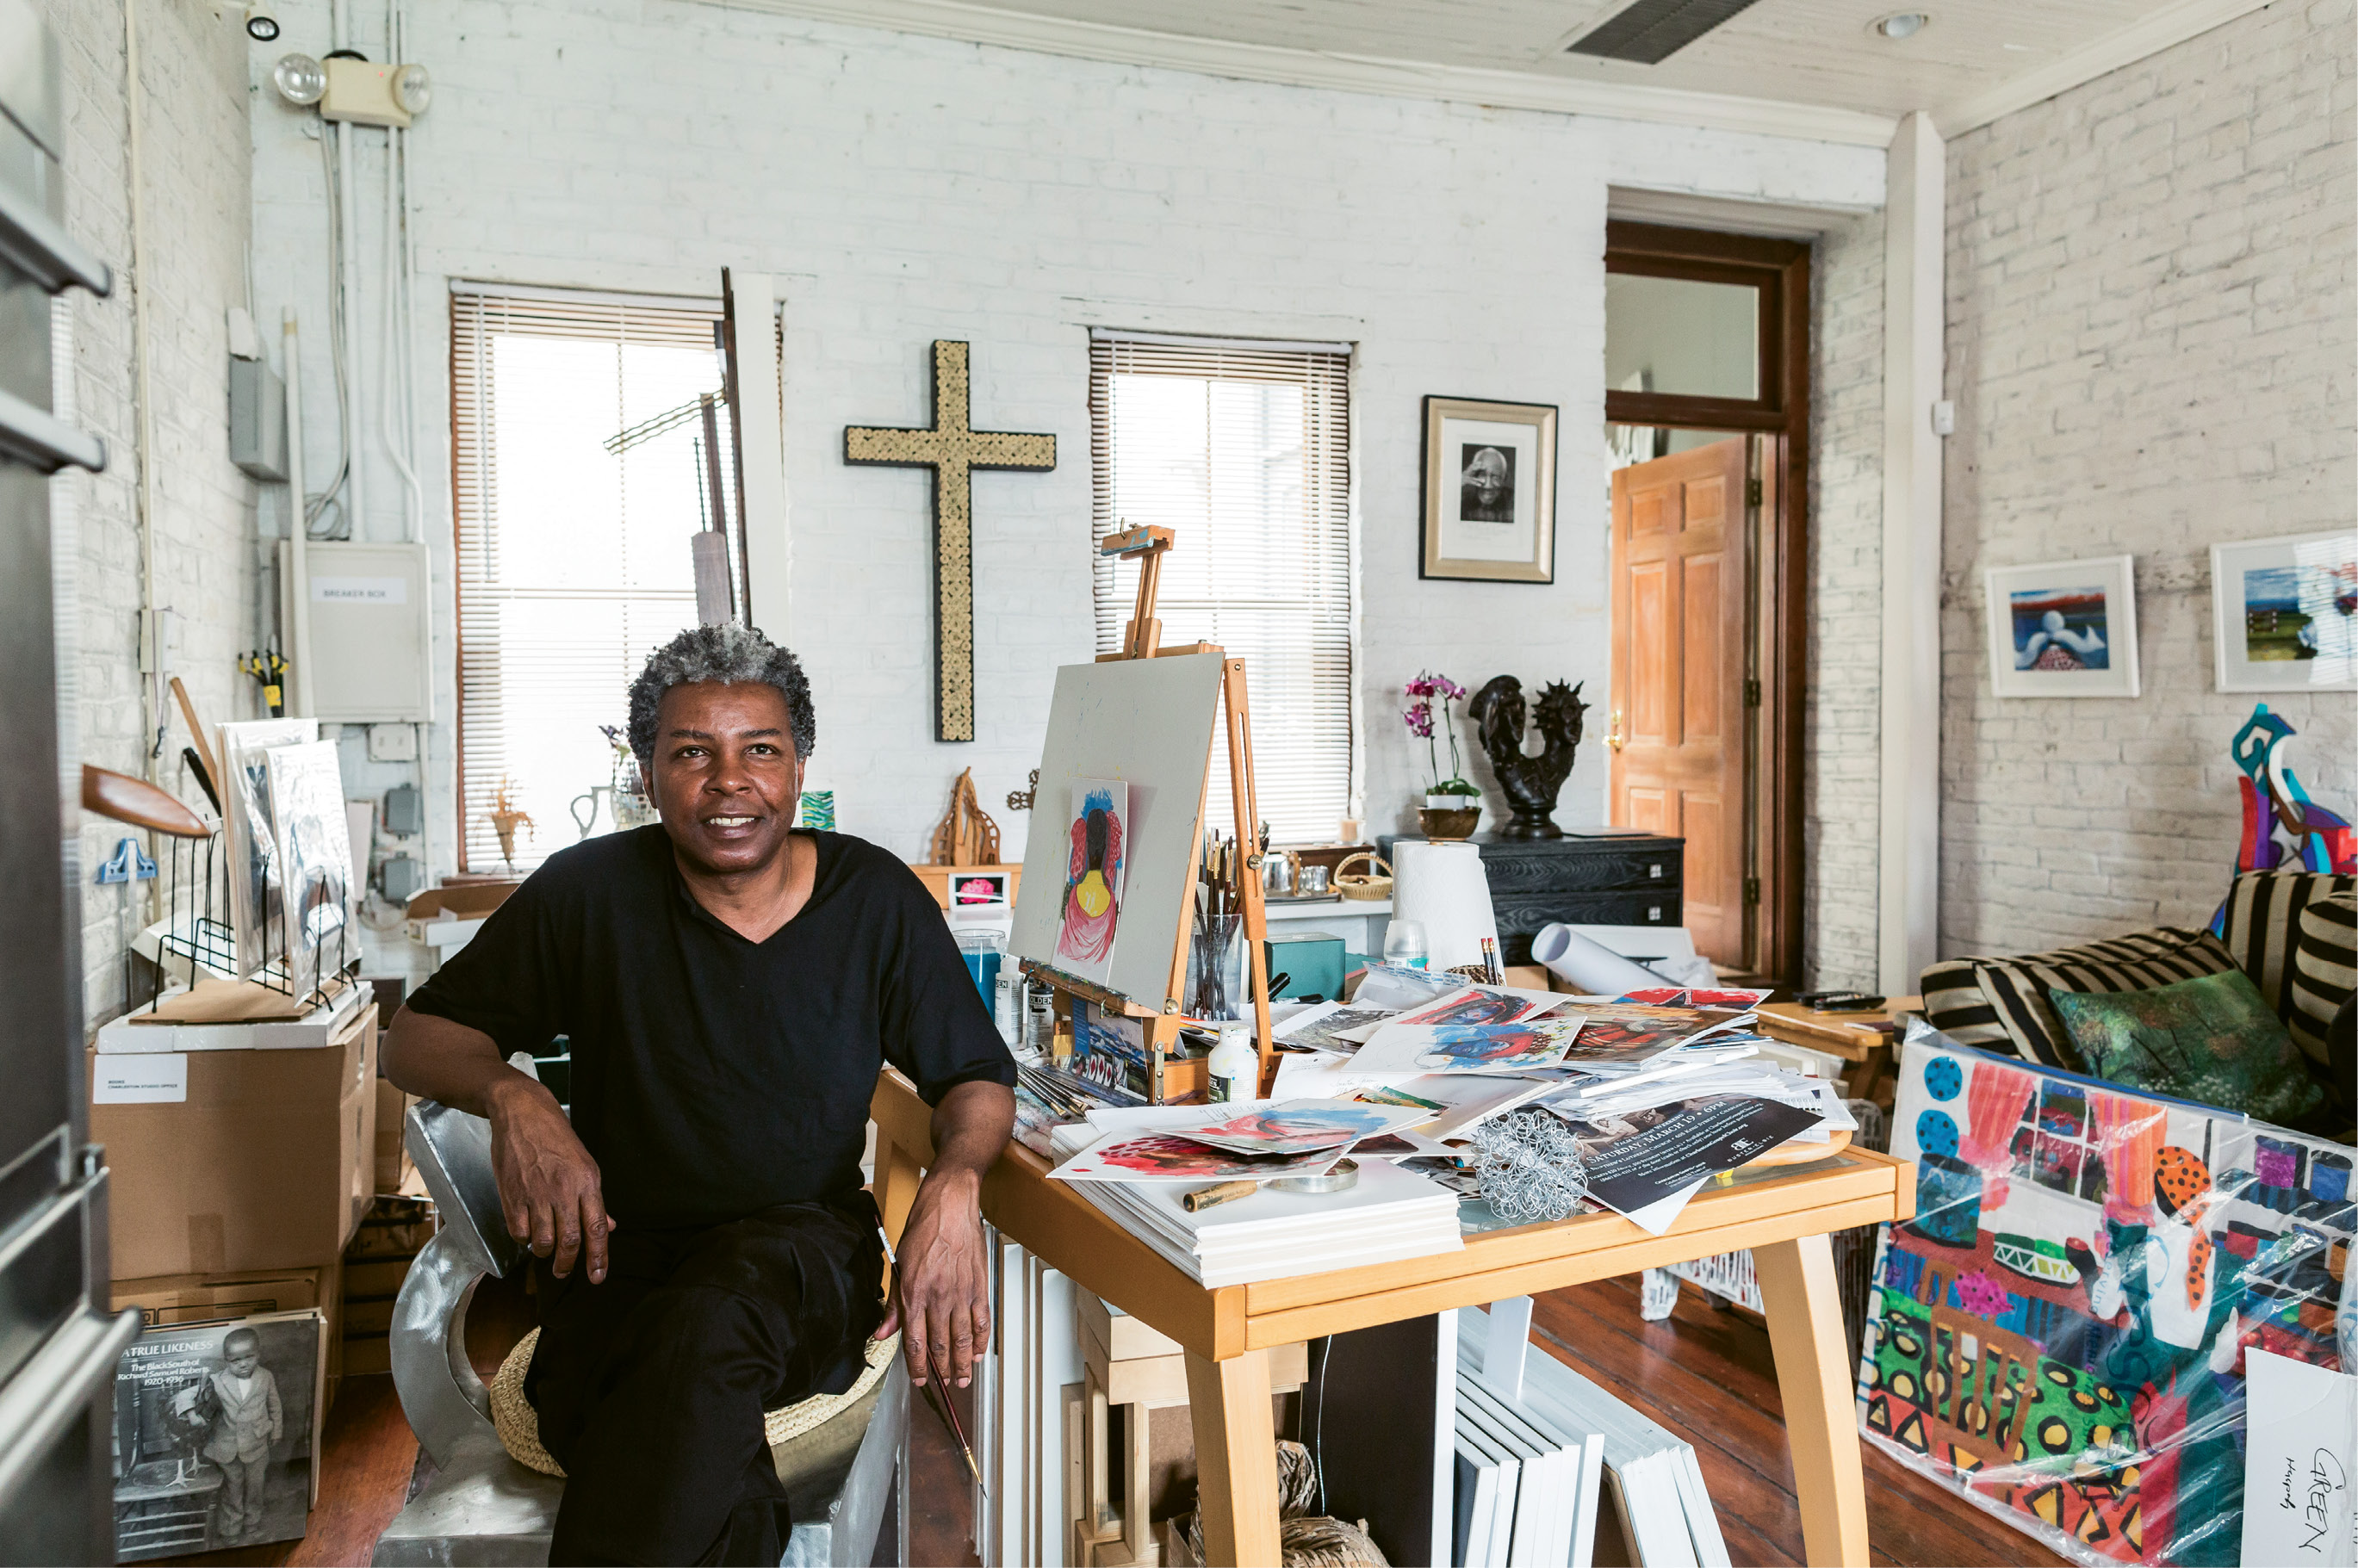 Green, at work in his downtown studio, is dressed in what he calls his “uniform” (always a black T-shirt and pants).